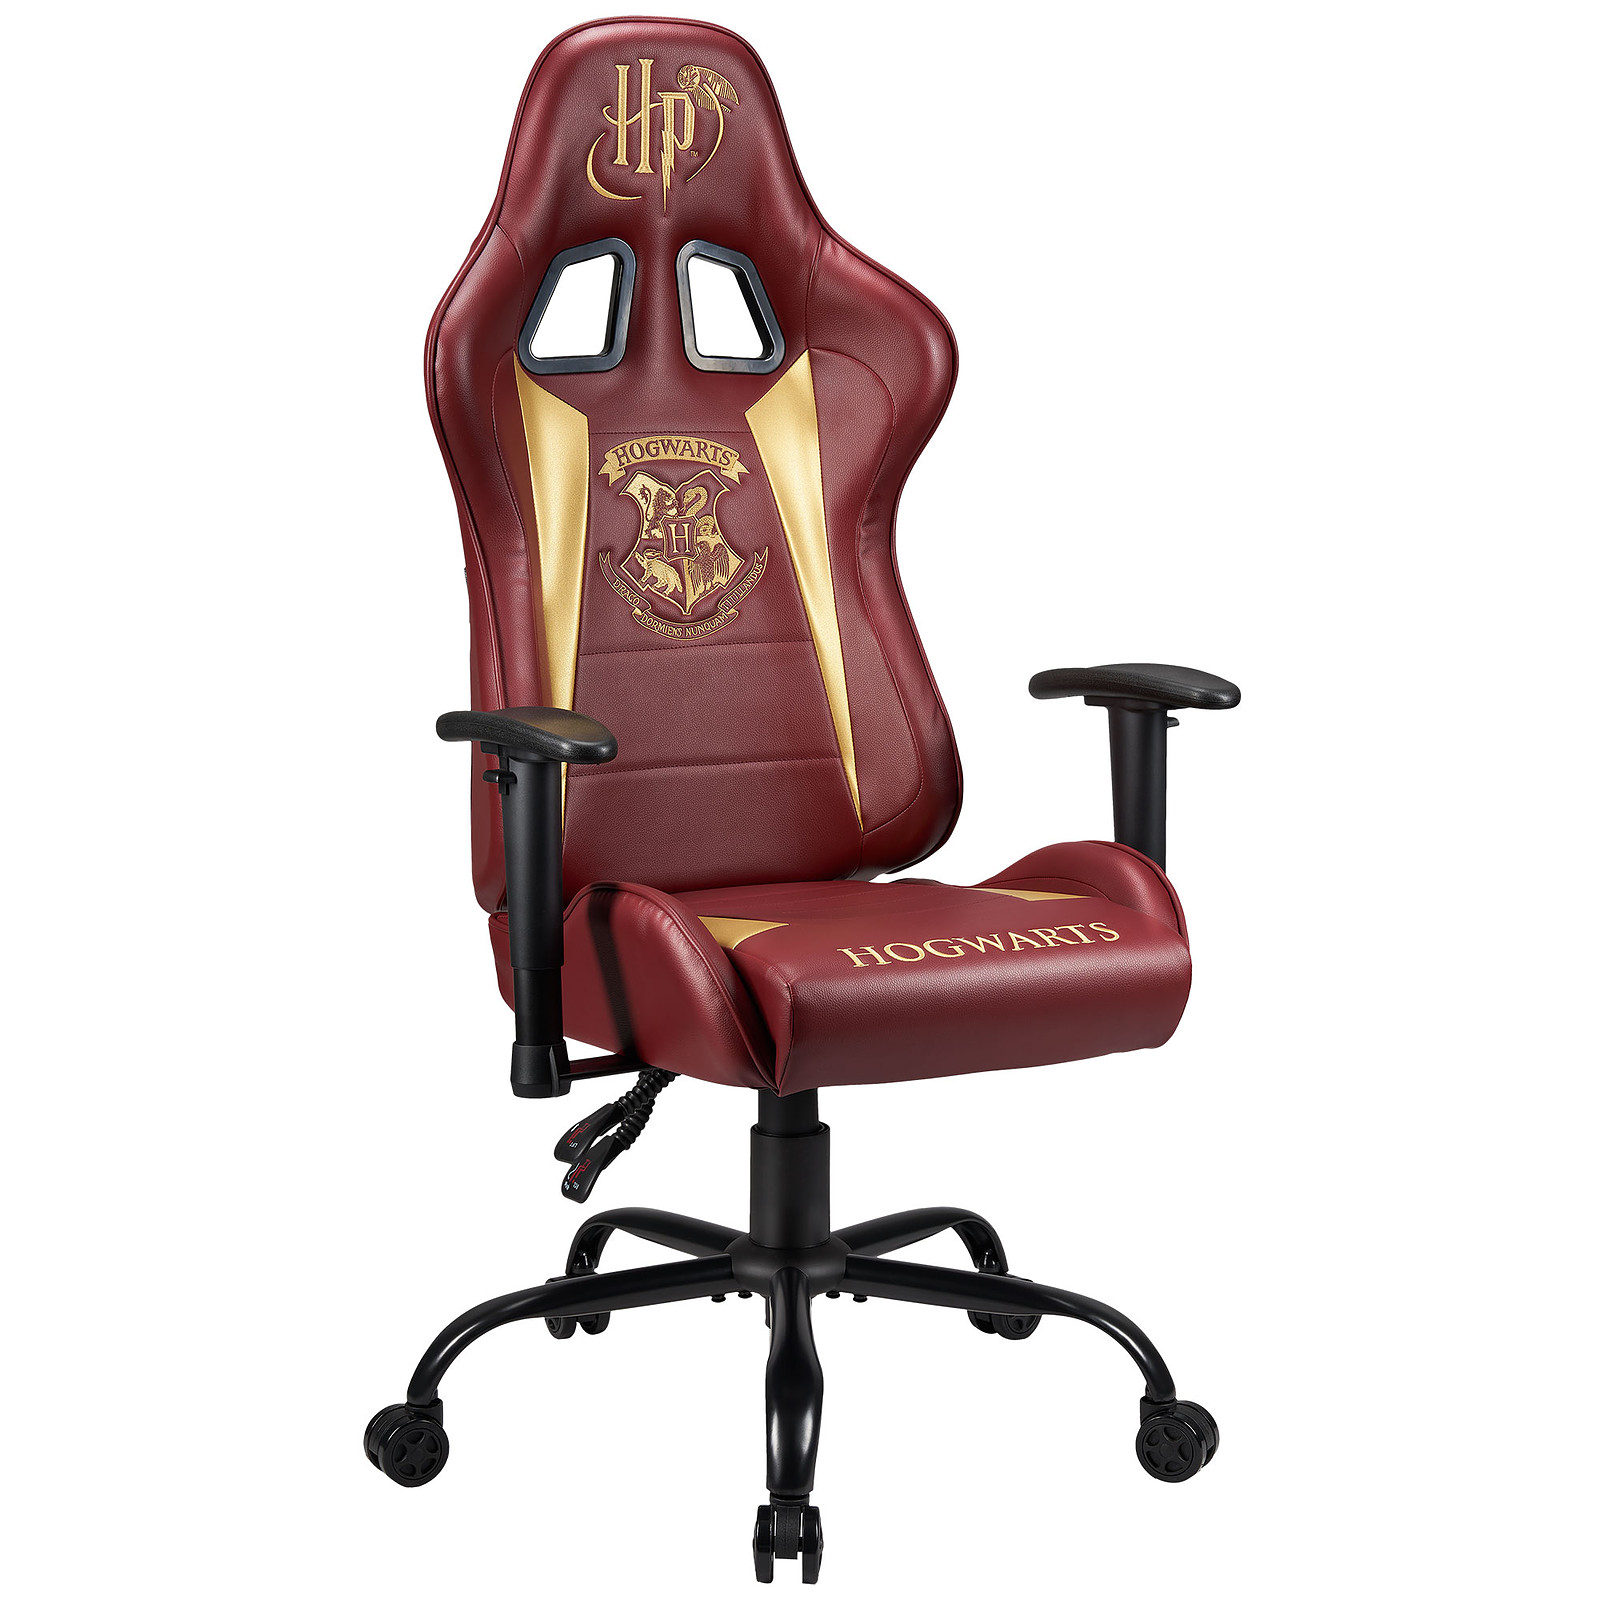 Subsonic Siège Harry Potter - Fauteuil gamer Subsonic